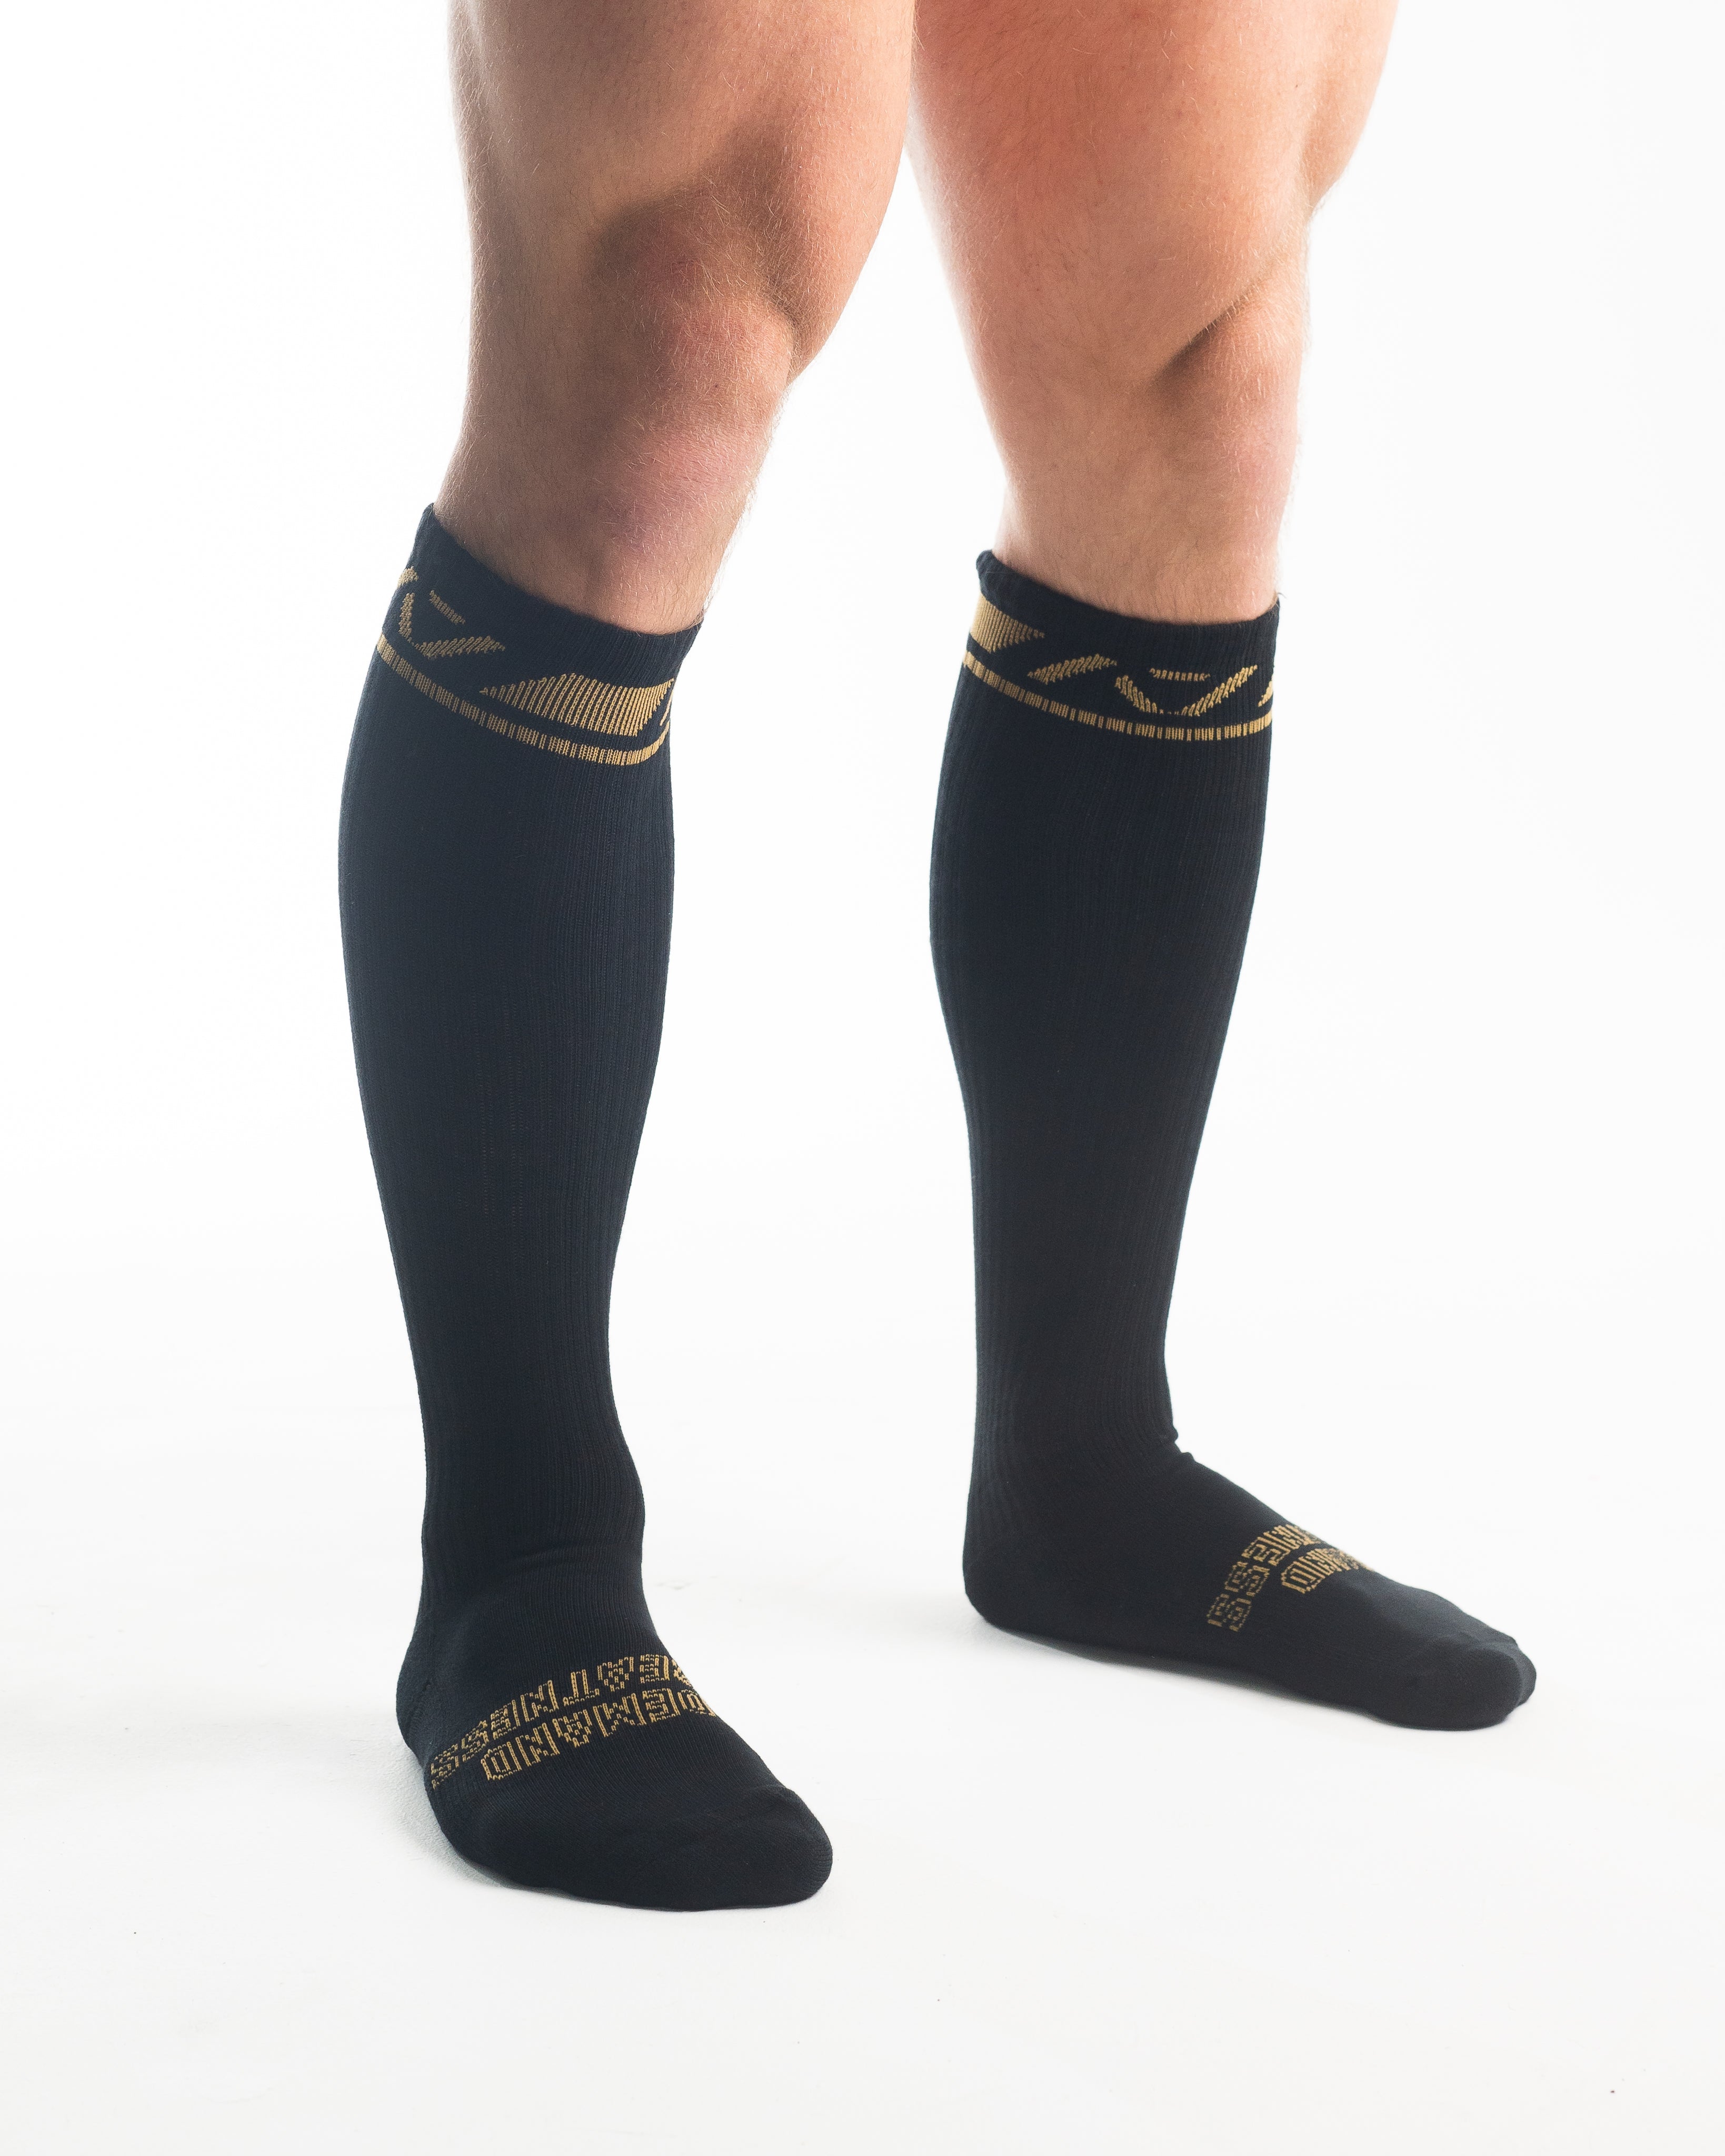 A7 Gold Standard Deadlift socks are designed specifically for pulls and keep your shins protected from scrapes. A7 deadlift socks are a perfect pair to wear in training or powerlifting competition. The IPF Approved Kit includes Powerlifting Singlet, A7 Meet Shirt, A7 Zebra Wrist Wraps, A7 Deadlift Socks, Hourglass Knee Sleeves (Stiff Knee Sleeves and Rigor Mortis Knee Sleeves). All A7 Powerlifting Equipment shipping to UK, Norway, Switzerland and Iceland.